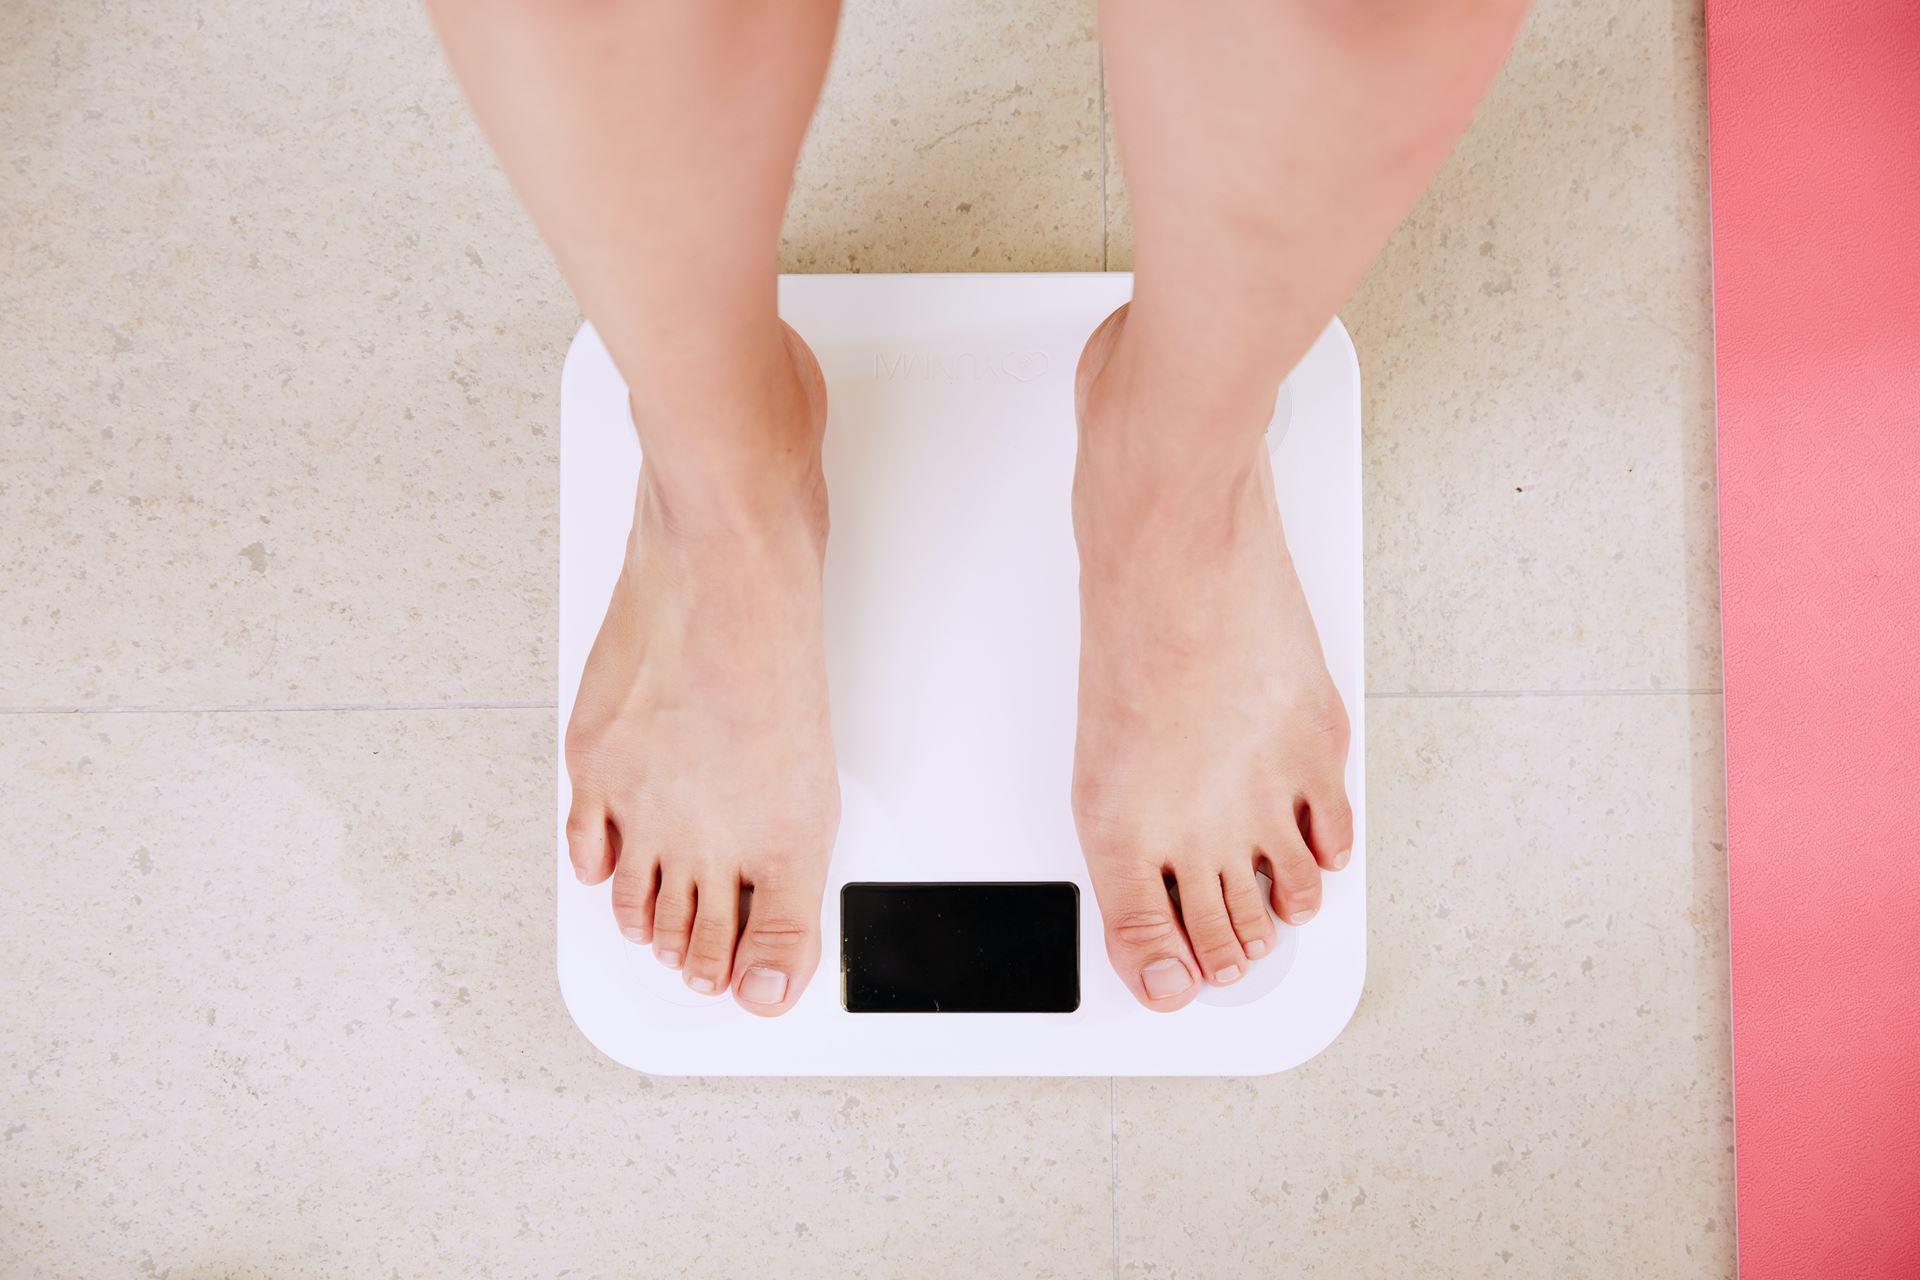 a person standing on some scales to weigh themselves